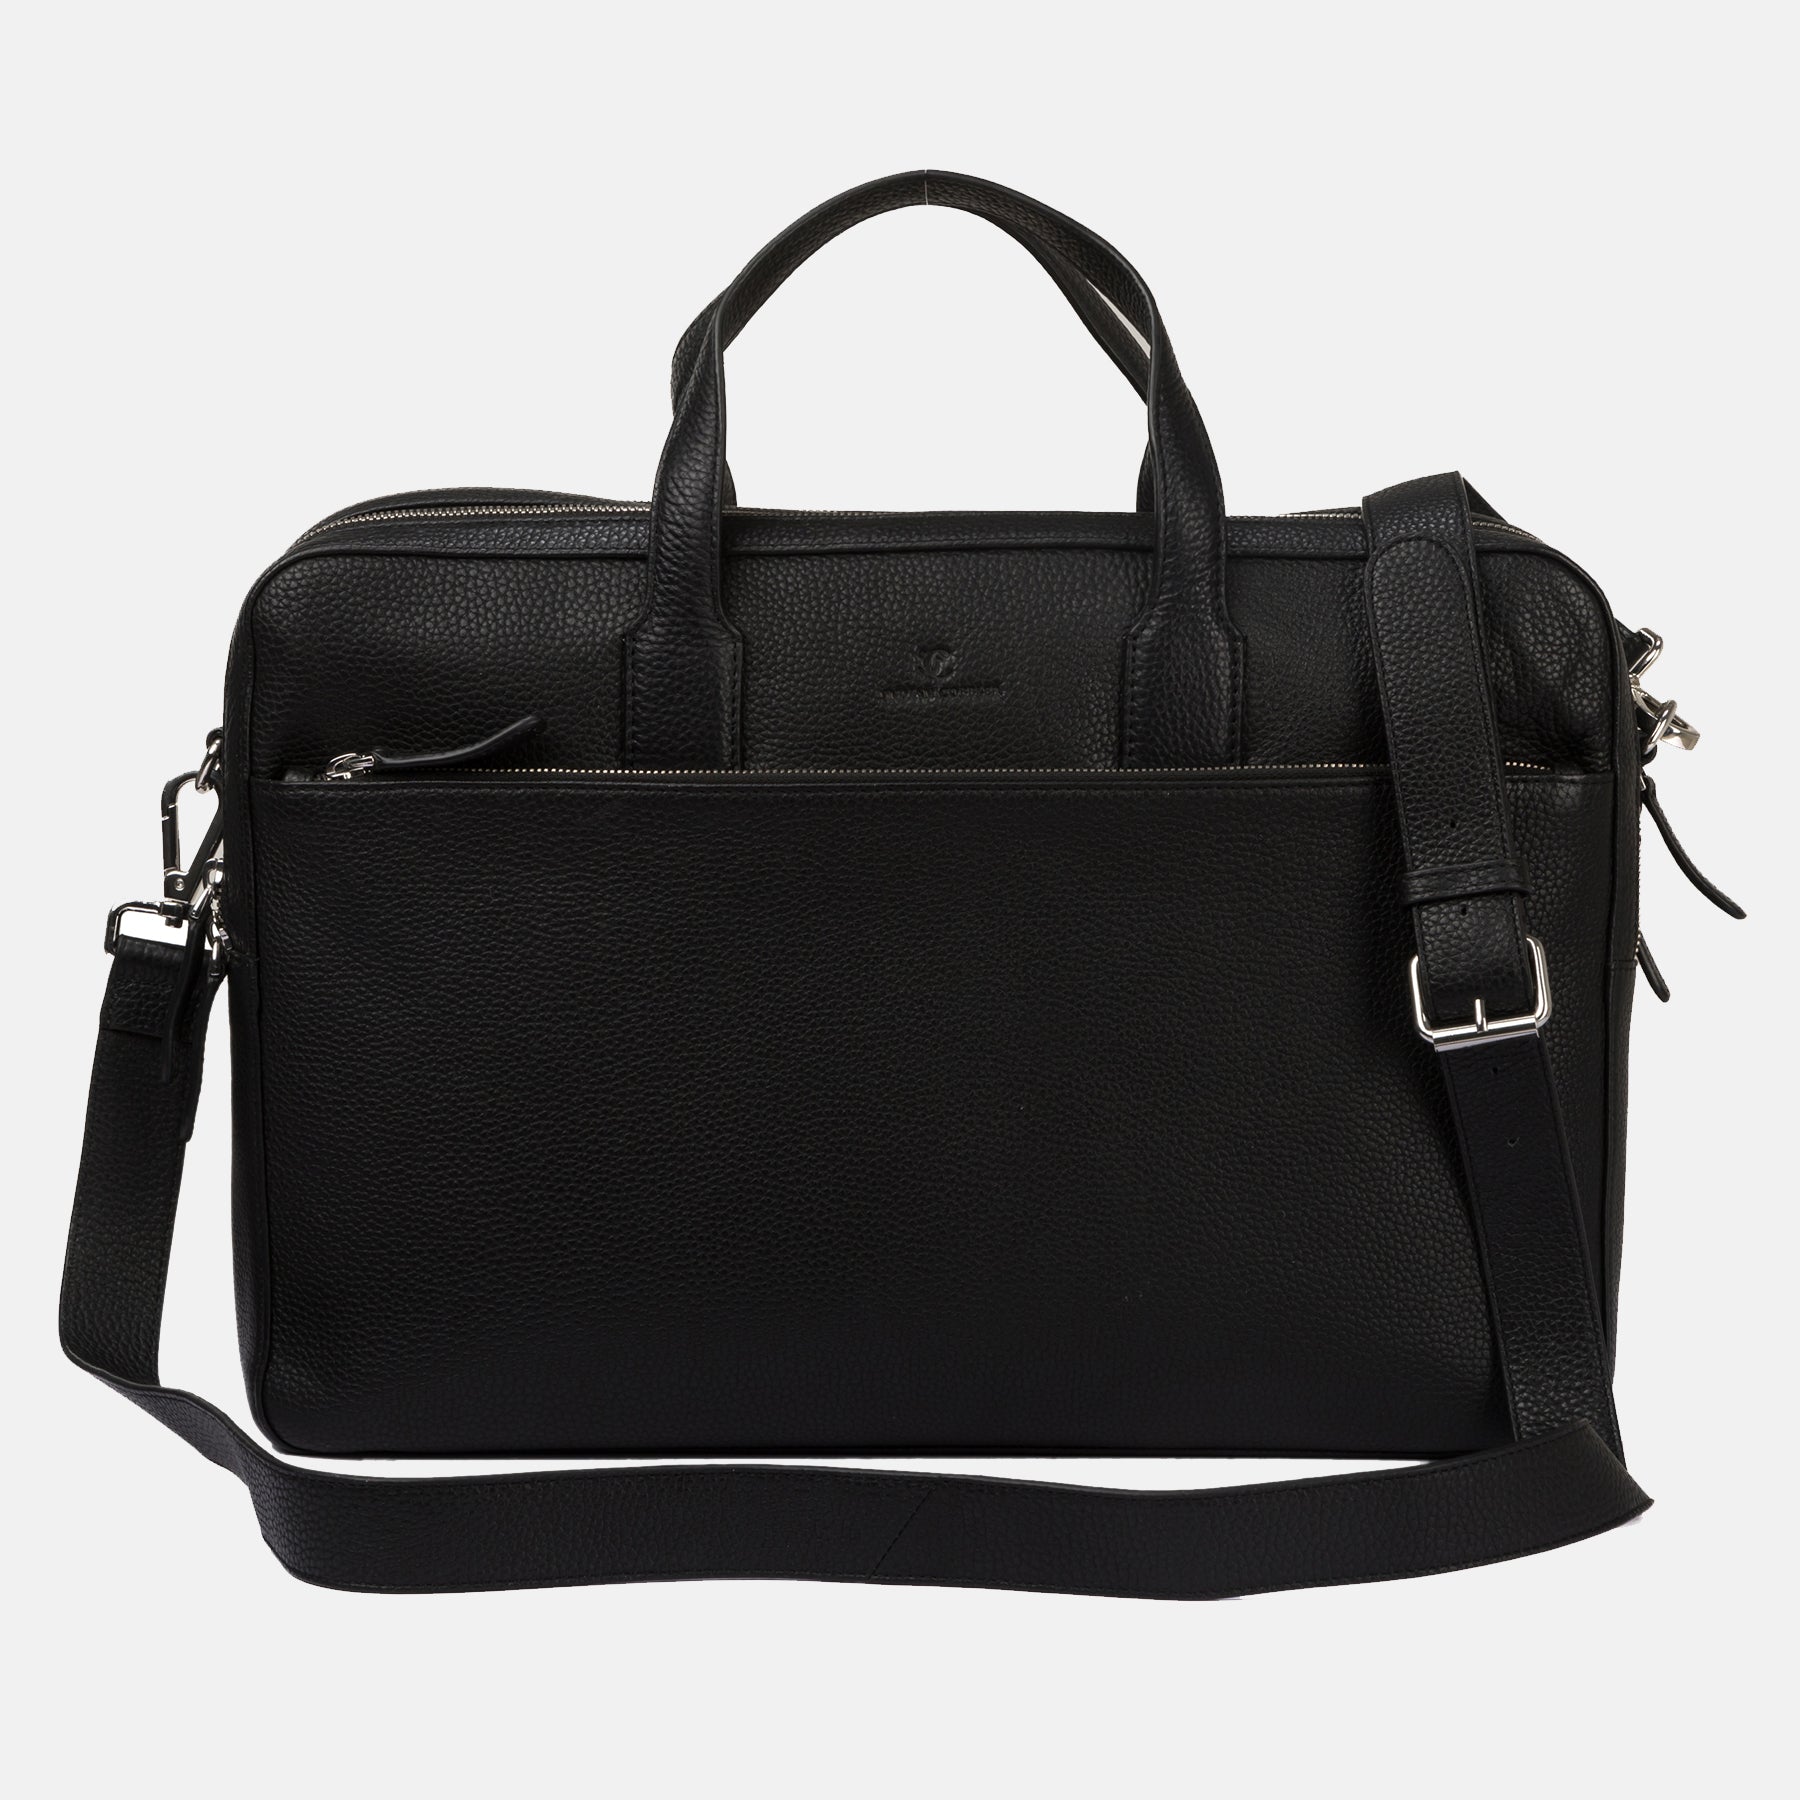 perfect laptop  bag  who carry more than 2-4 electronic gadgets like laptop ,tablets etc